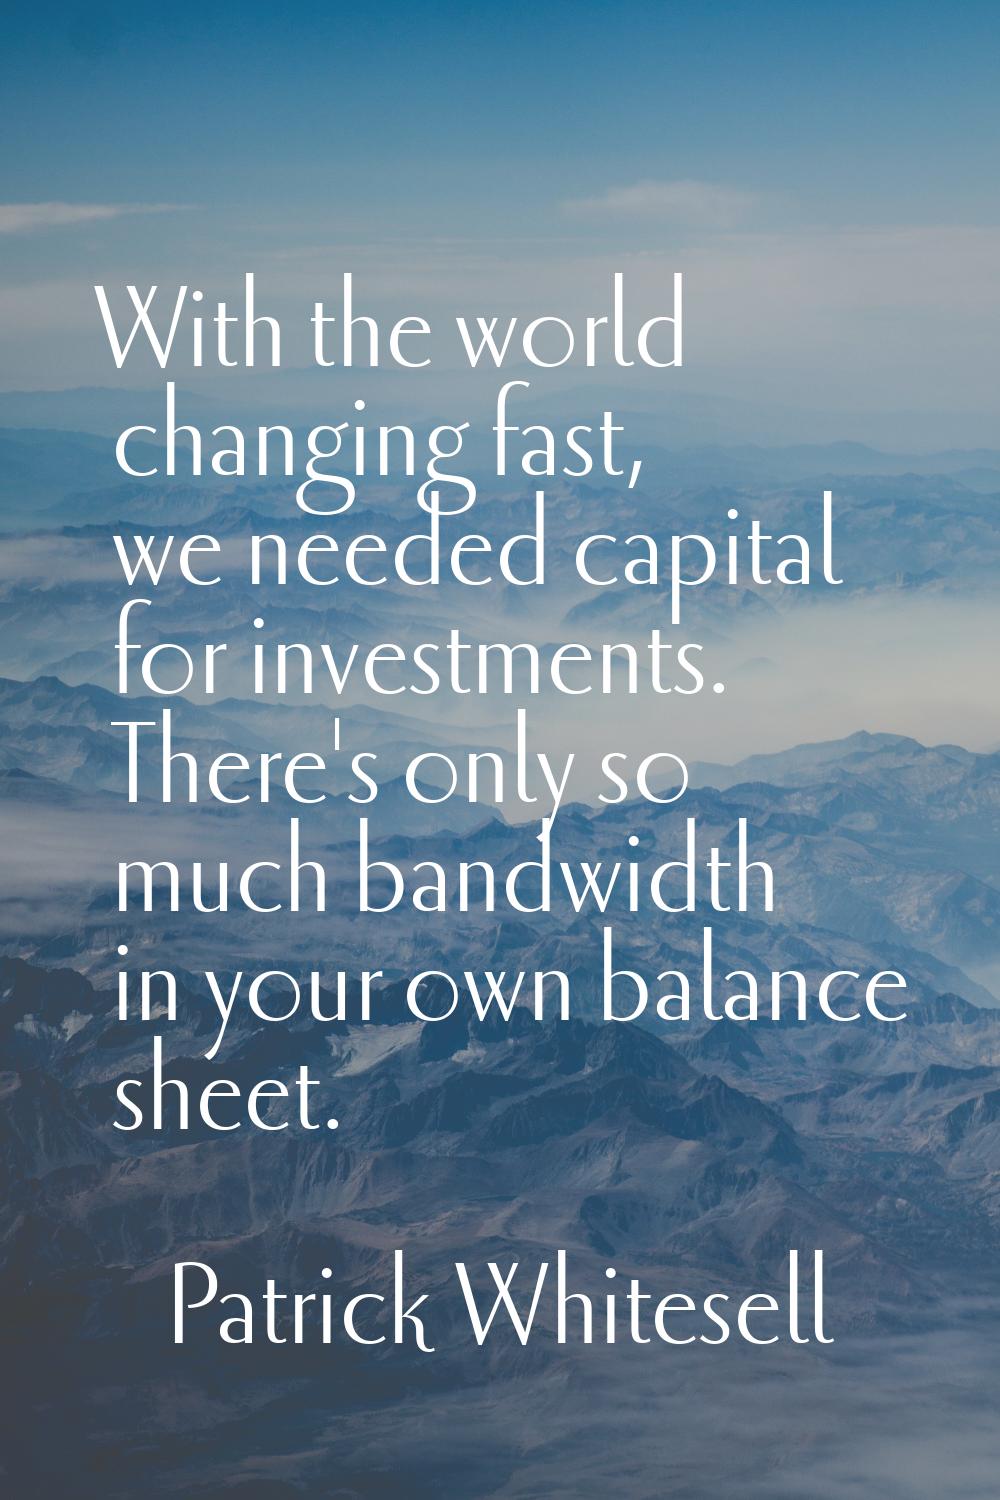 With the world changing fast, we needed capital for investments. There's only so much bandwidth in 